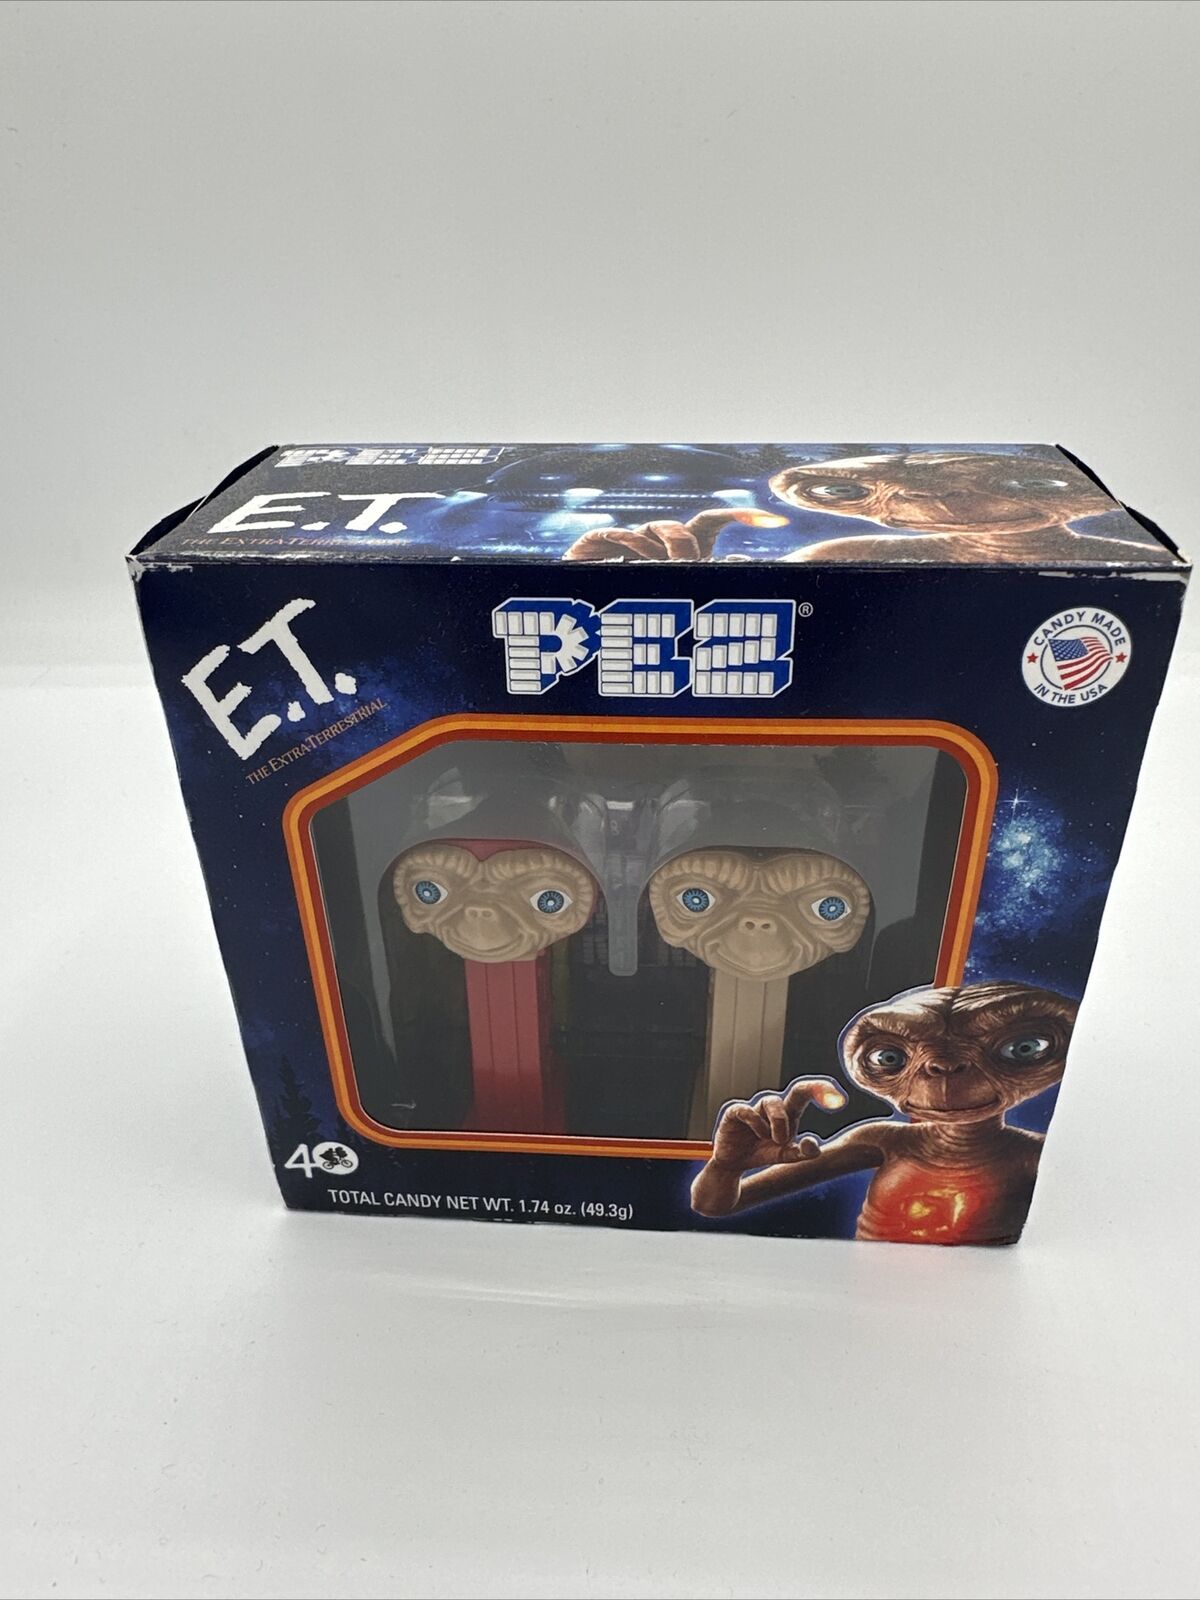 E.T. 40th Anniversary Gift Set PEZ Candy Dispenser *NEW* Extraterrestrial Alien